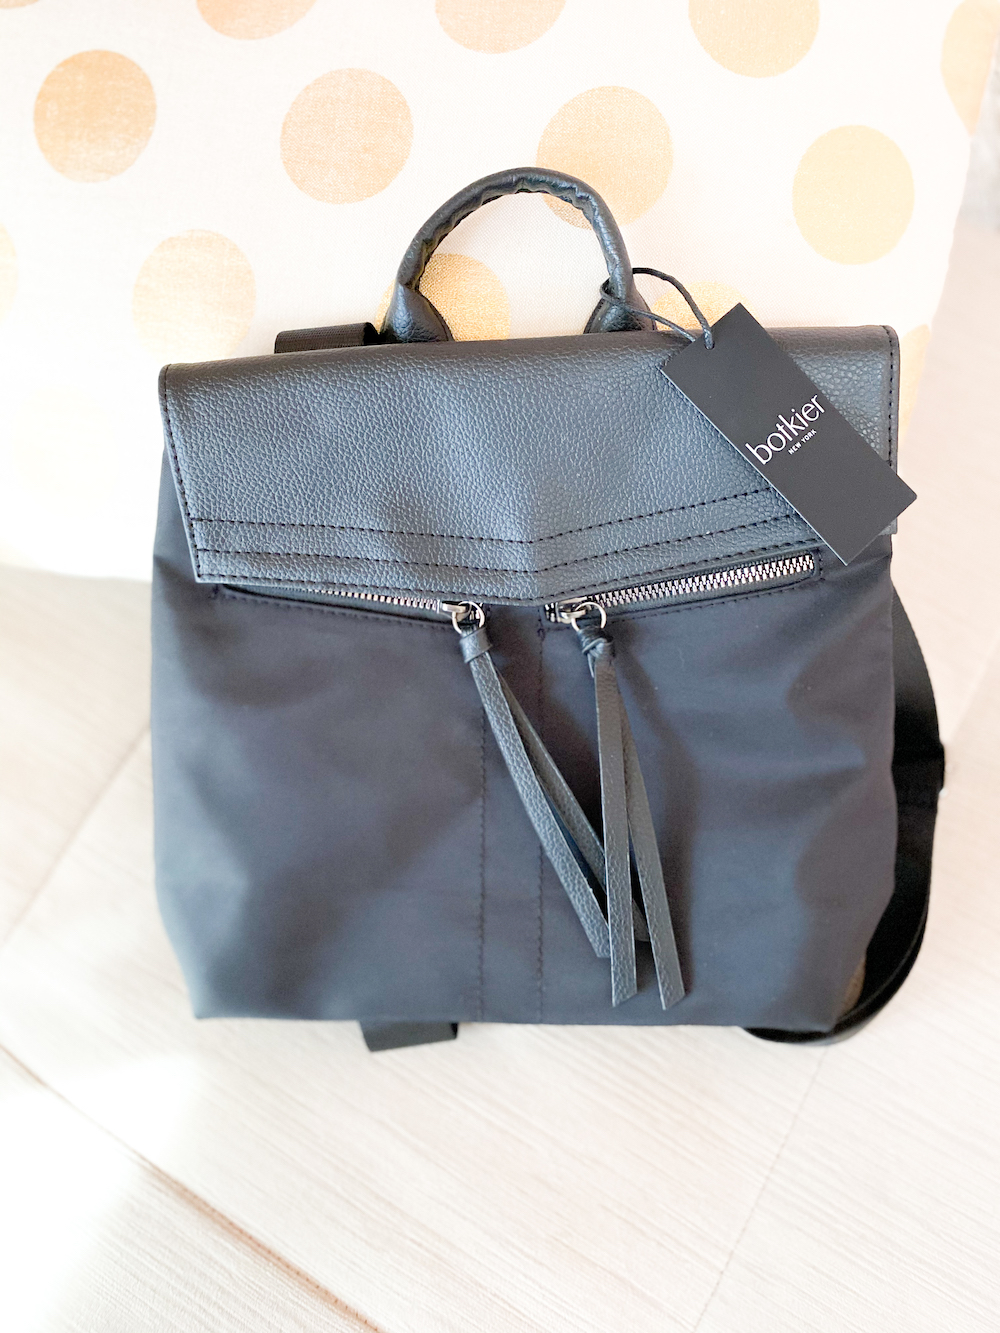 Botkier Mini Backpack Review | Crazy Cute Bag Under $70